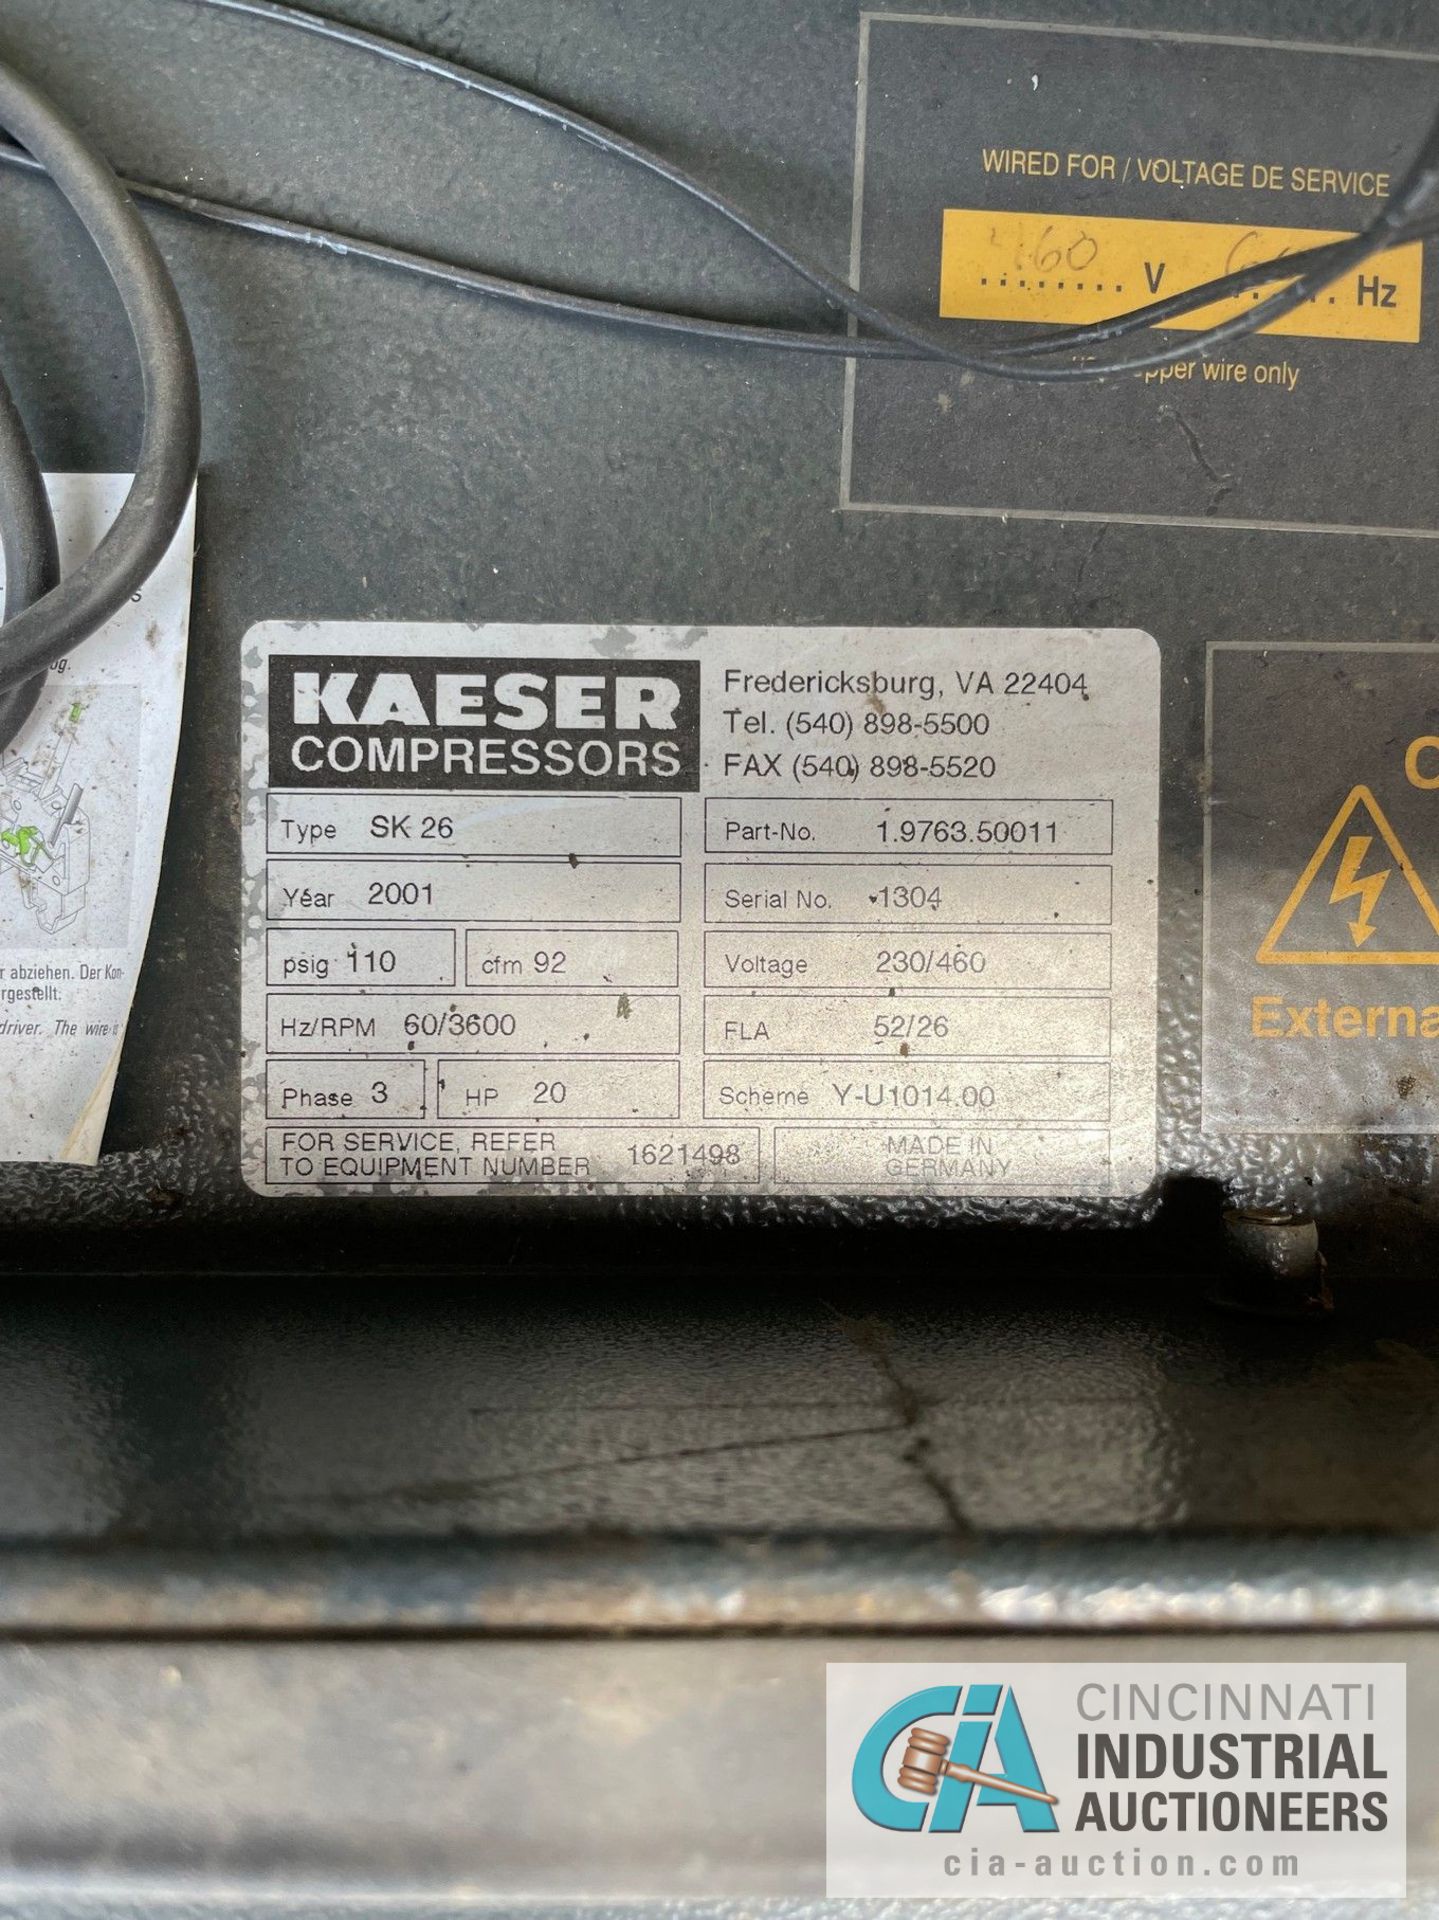 20 HP KAESER MODEL SK-26 AIR COMPRESSOR; S/N 1304 (NEW 2001), CONDITION UNKNOWN, WAS IN PLACE HOOKED - Image 3 of 3